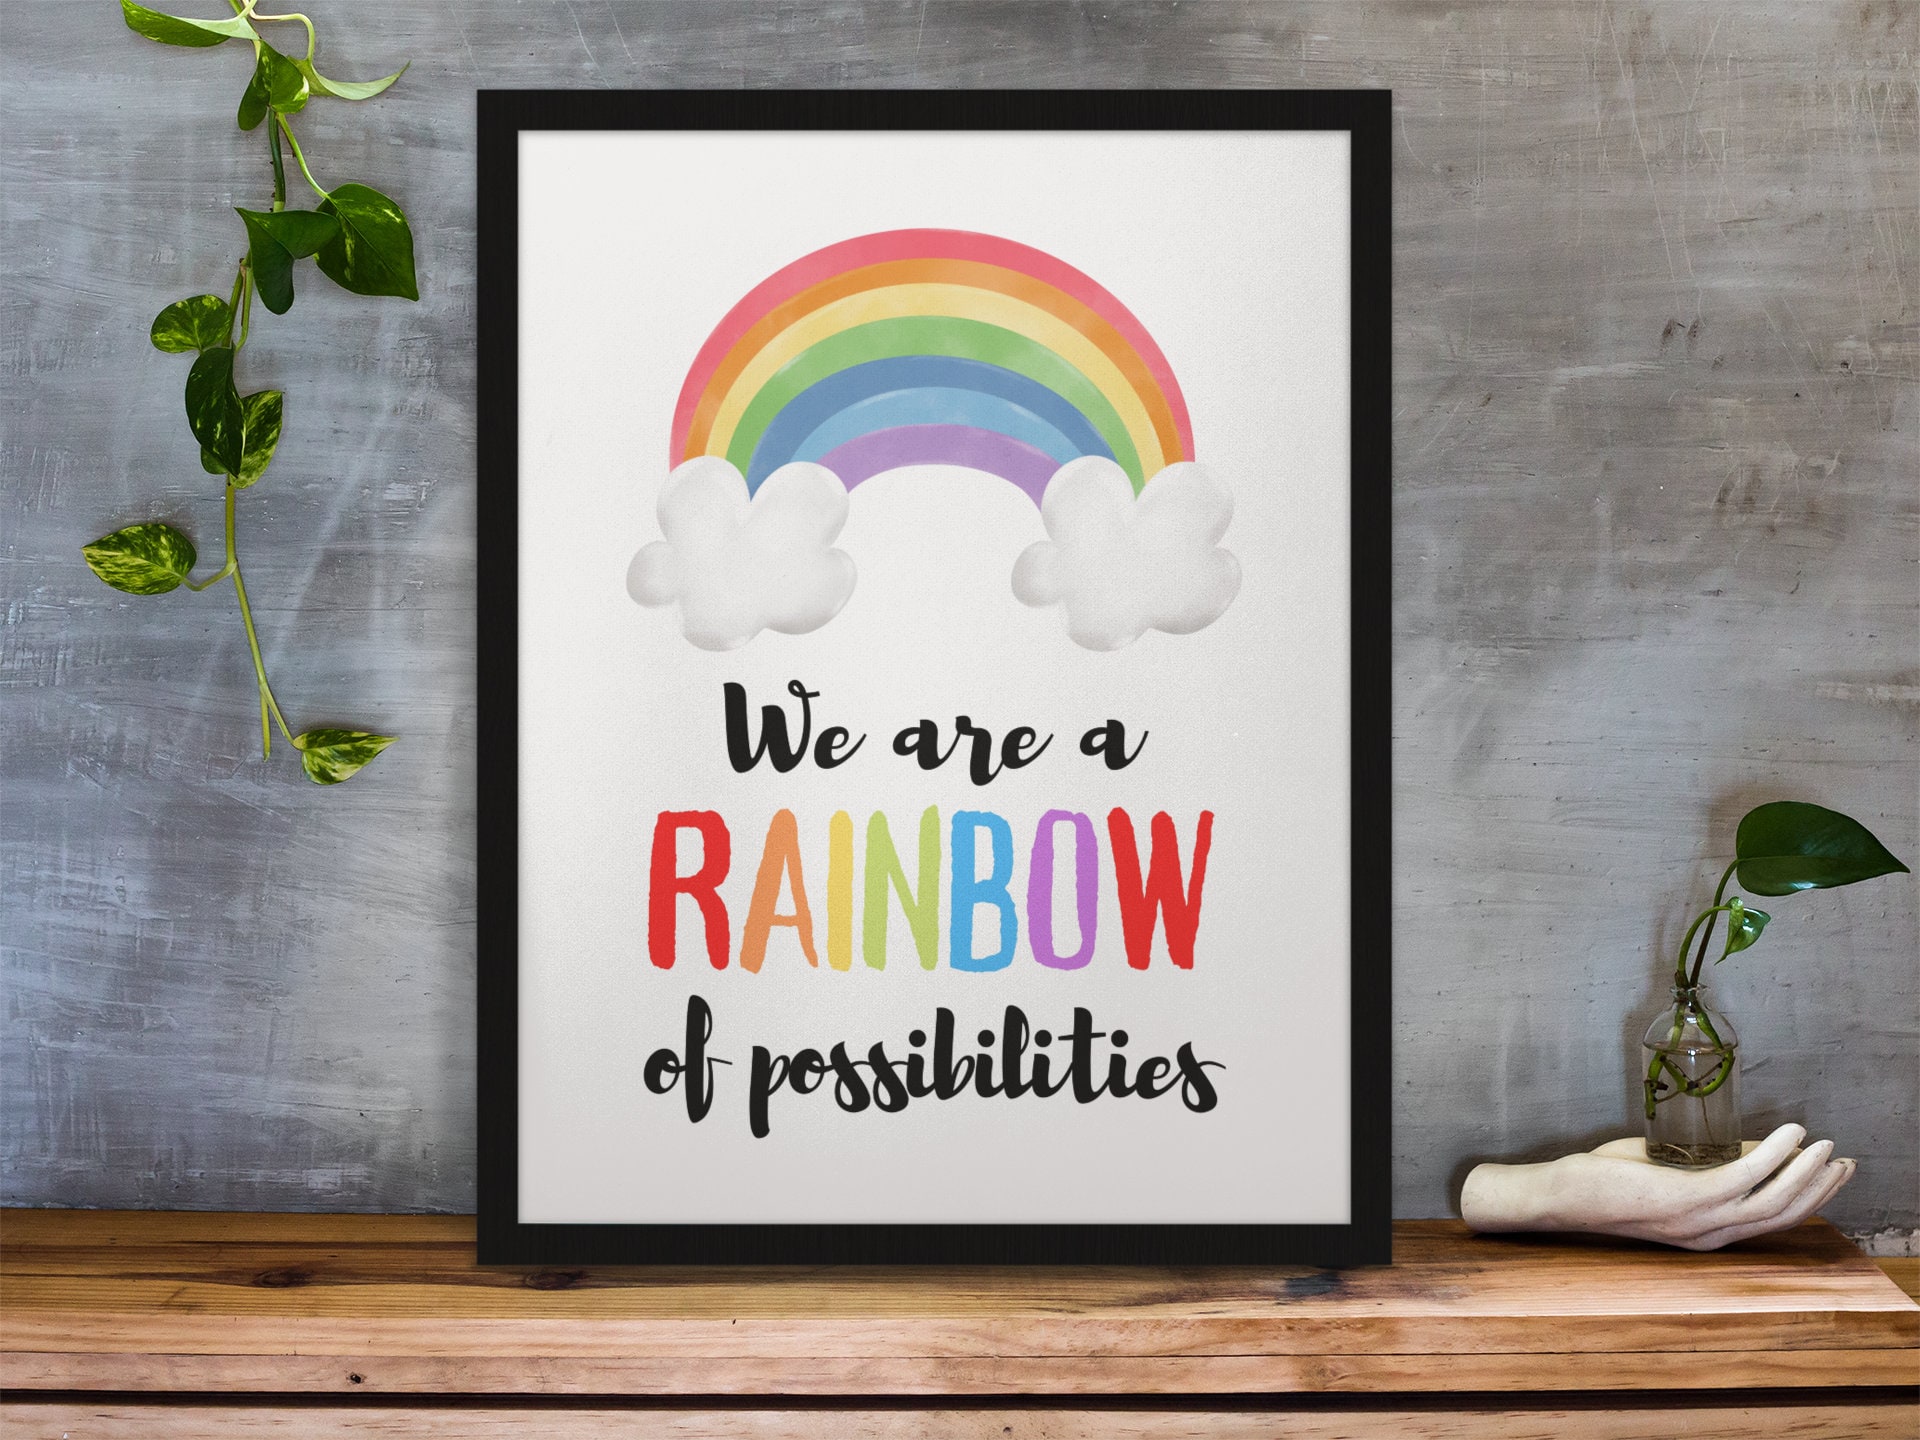 You Are Your Own Rainbow - Motivational Quote Stickers